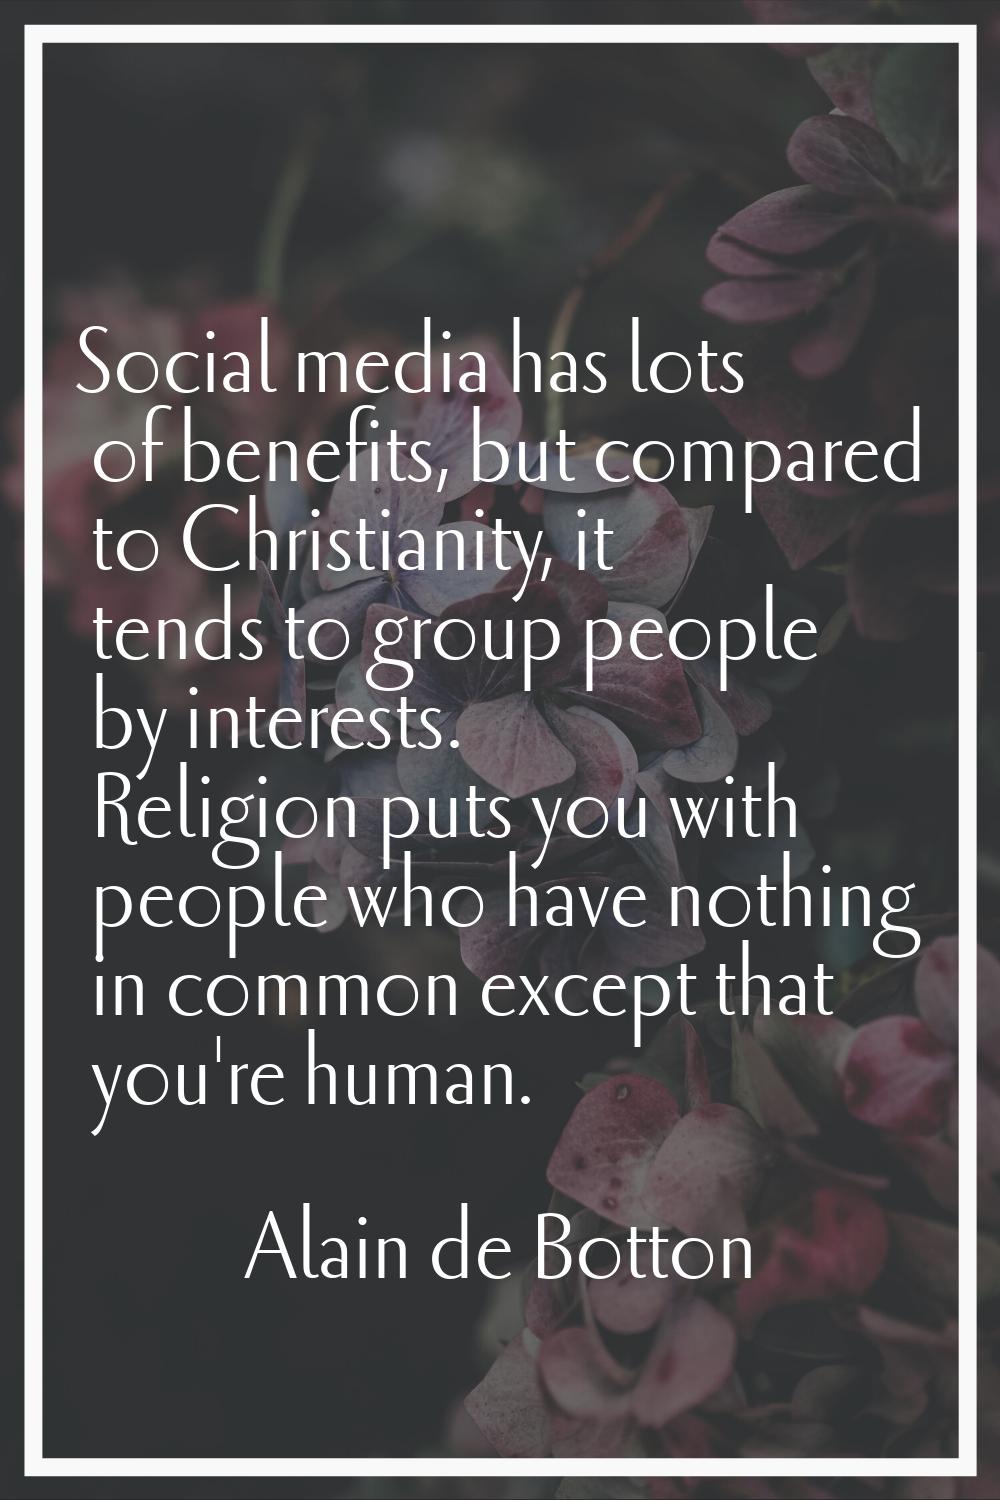 Social media has lots of benefits, but compared to Christianity, it tends to group people by intere